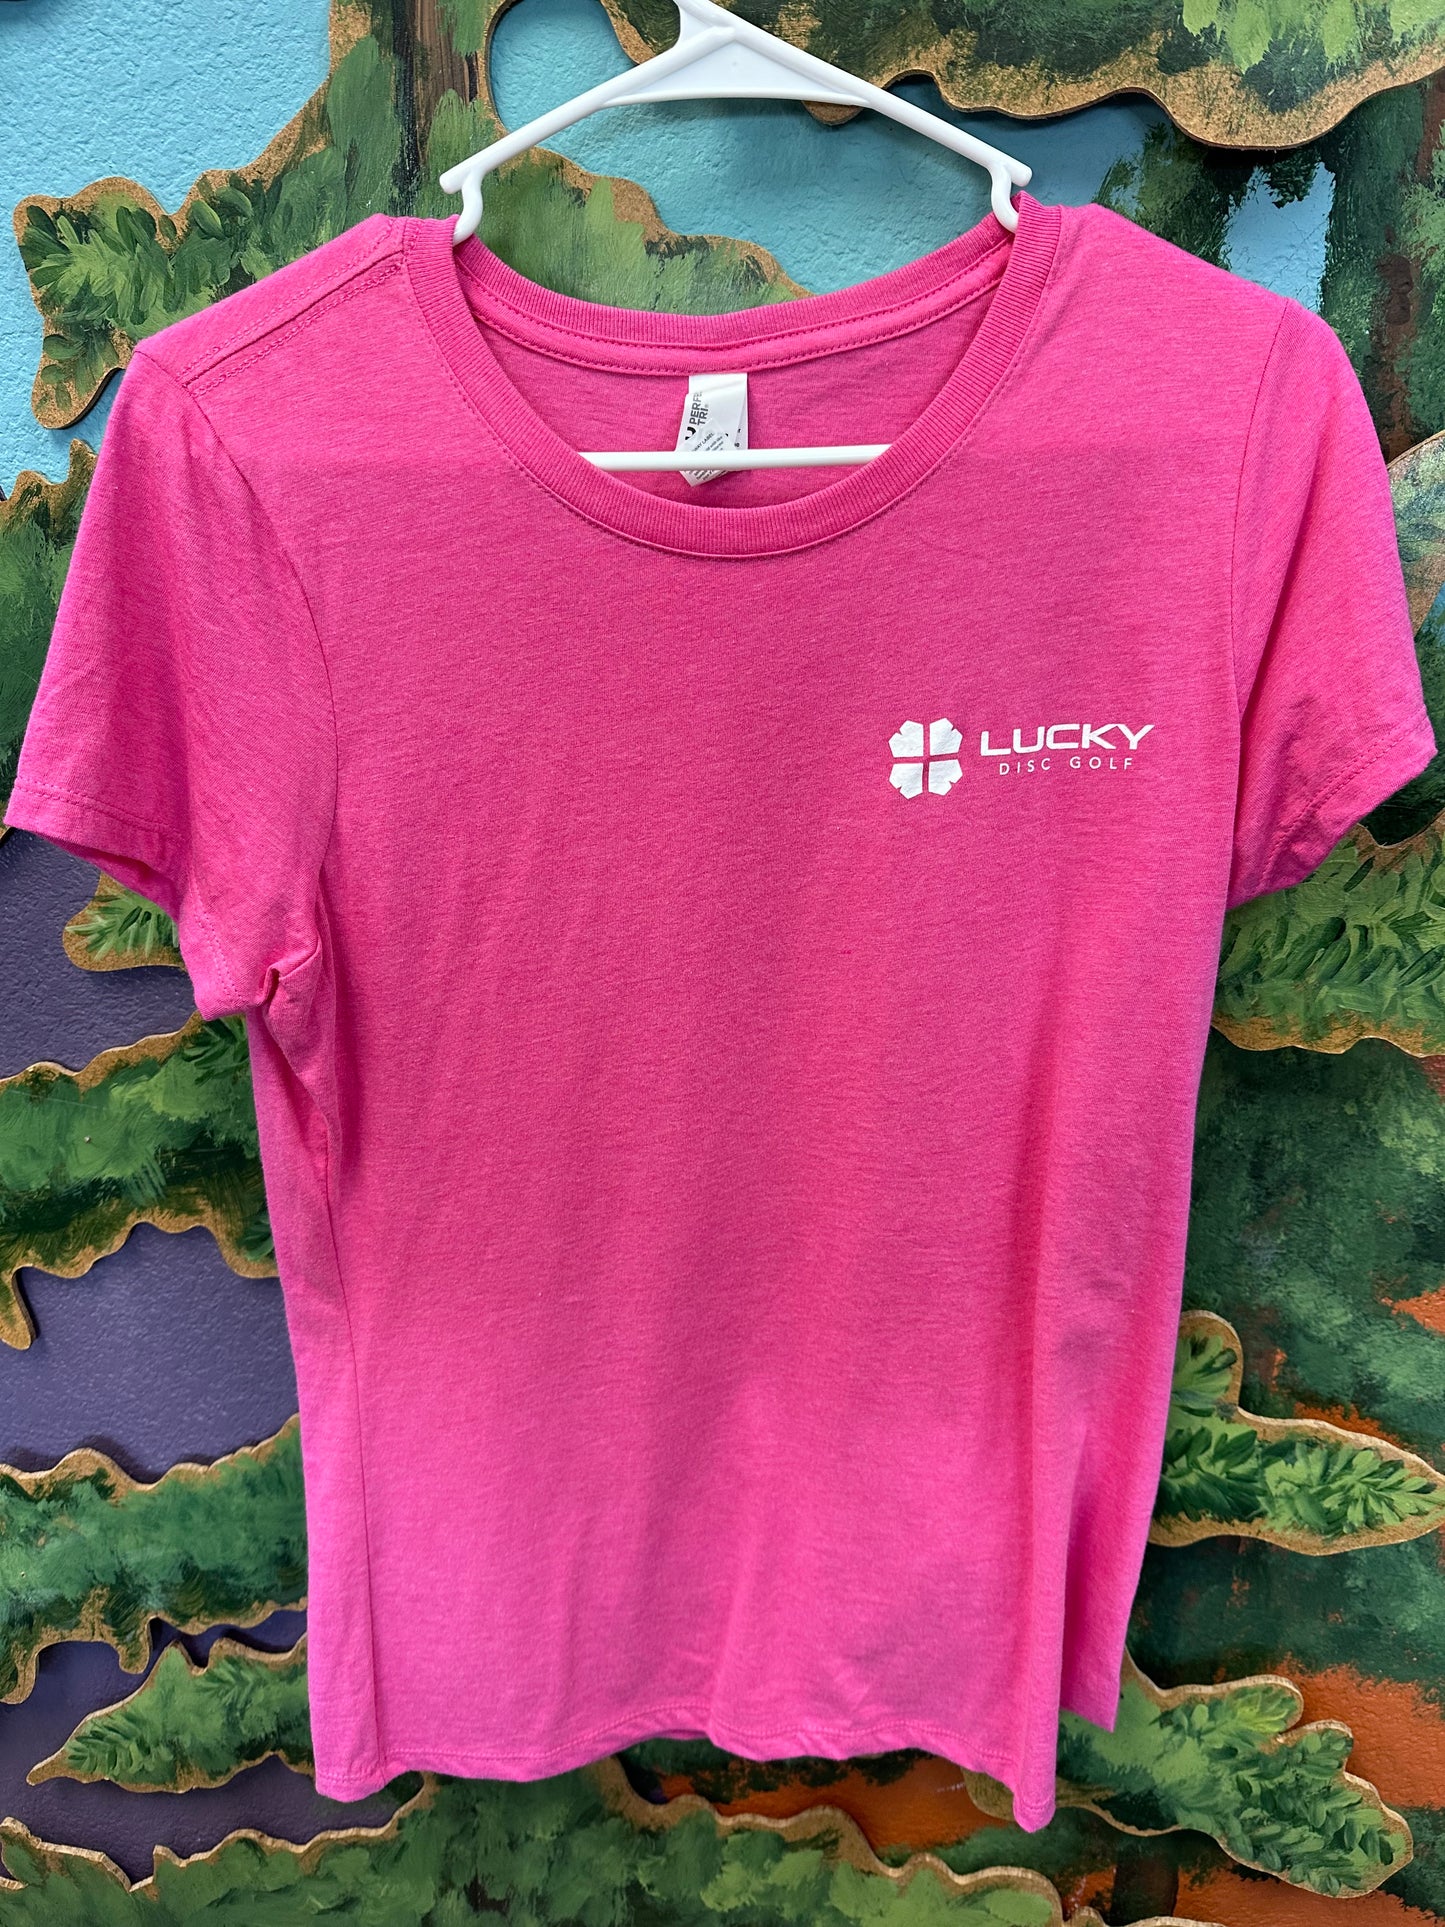 Tri Blend Womens Lucky Disc Golf Brand Shirt - Available in 7 Colors